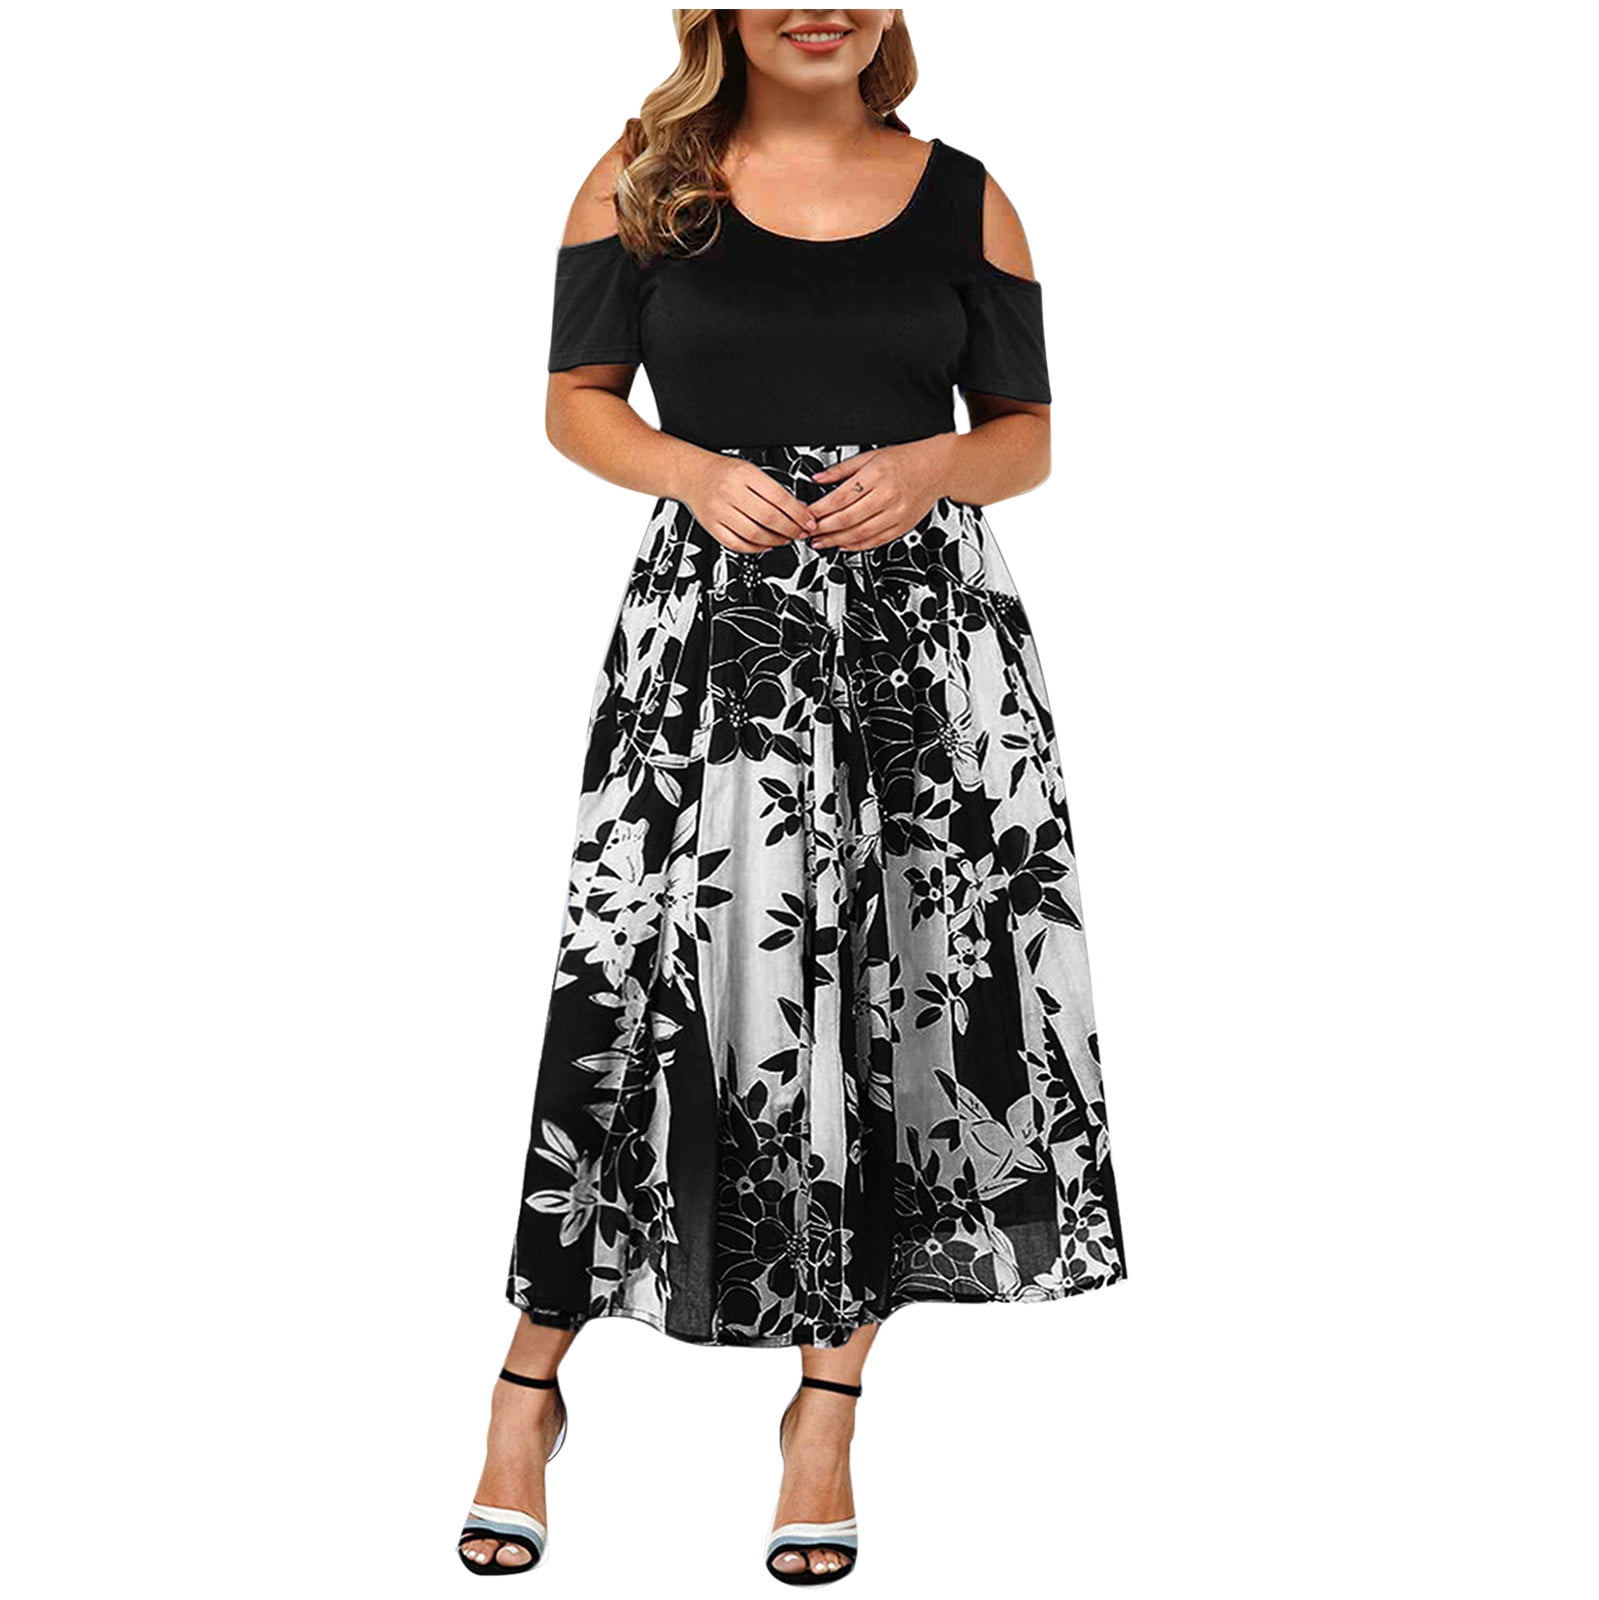 Mchoice Plus Size Summer Dresses for Women Sexy O-Neck Strapless Draw ...